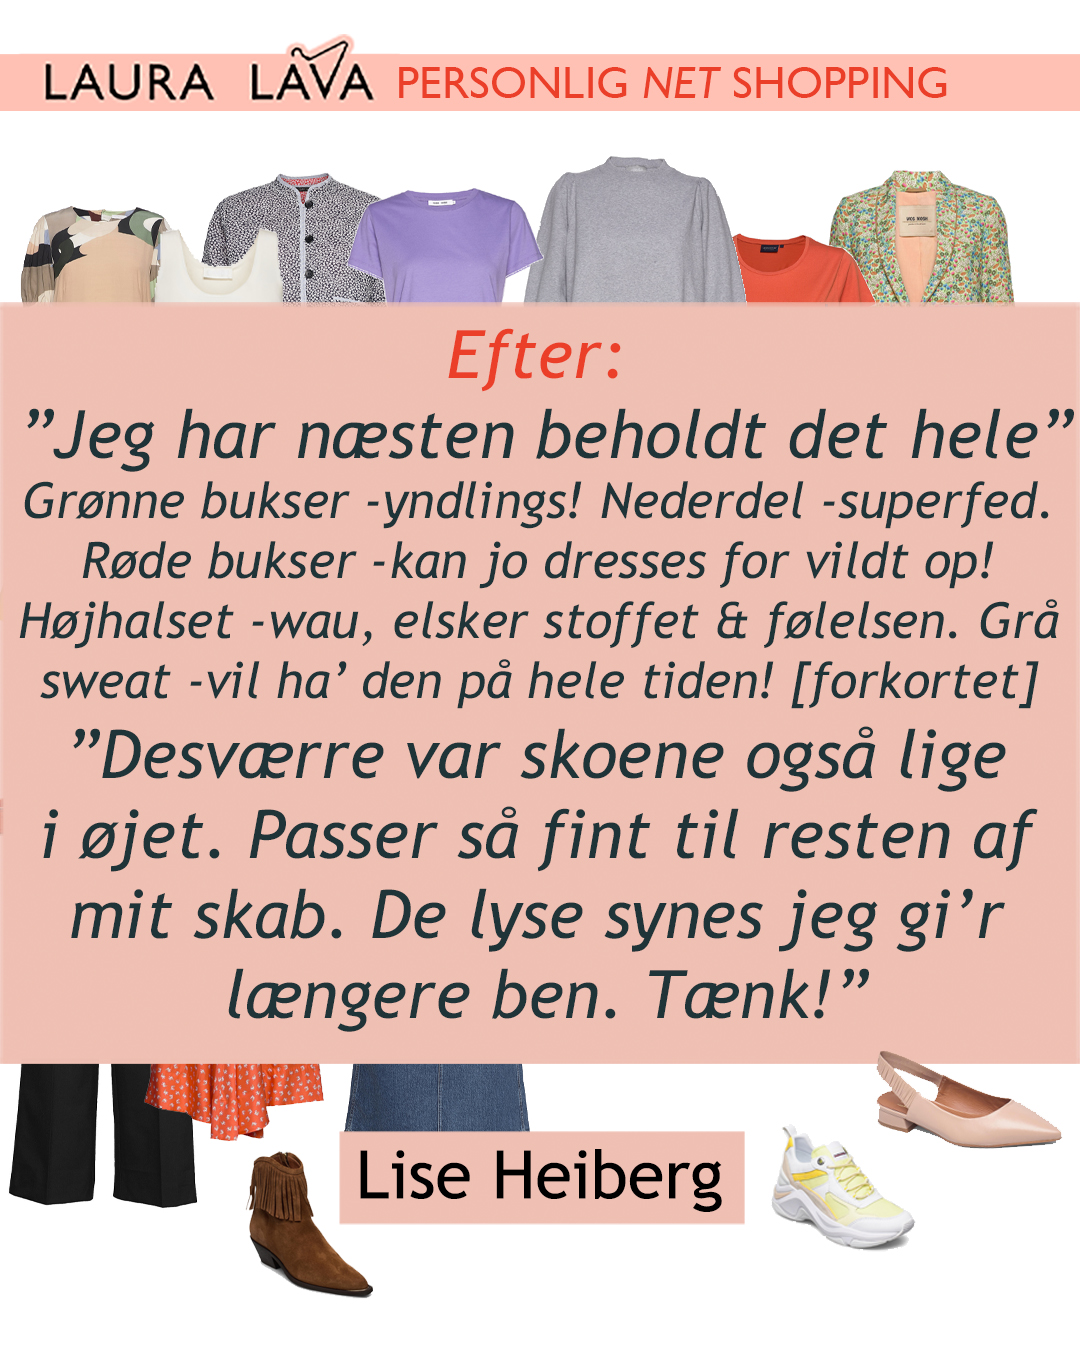 1080 x 1350 px Personlig Shopping Lise efter